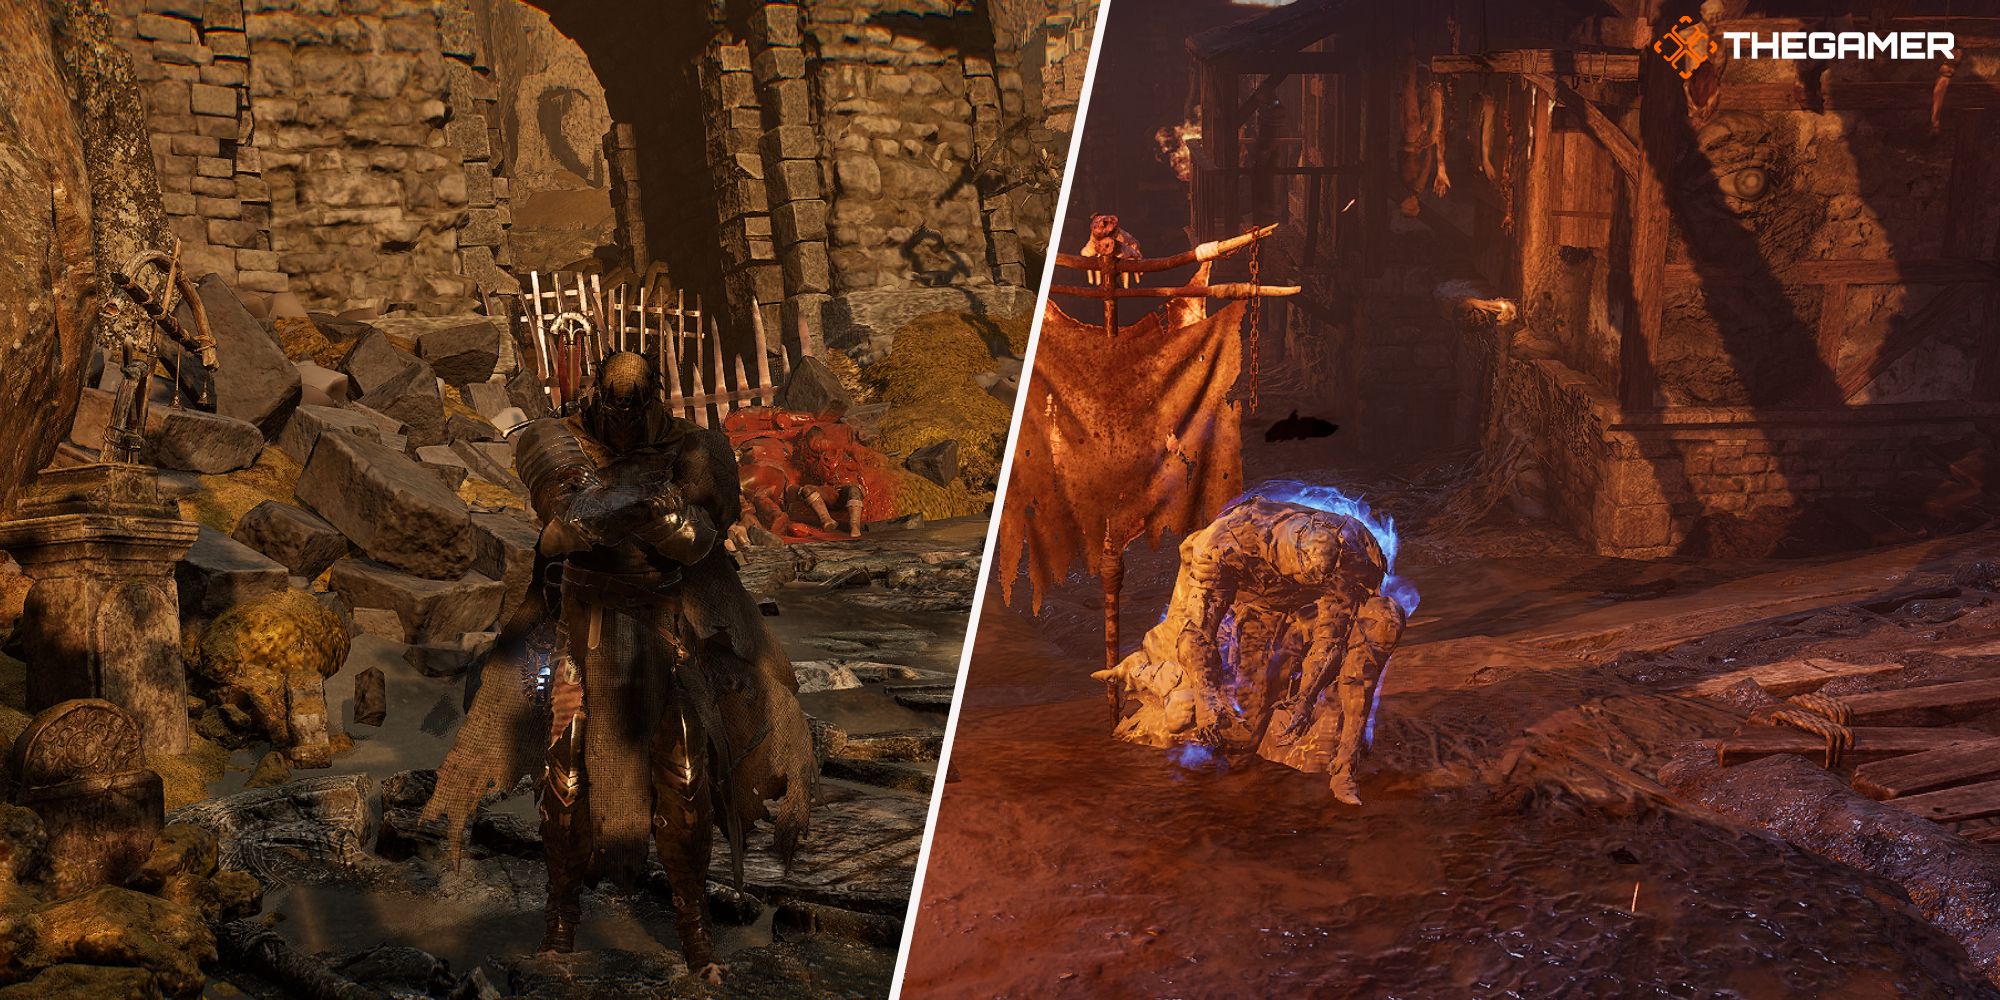 Lords Of The Fallen Lower Calrath Walkthrough, Guide, and More - News